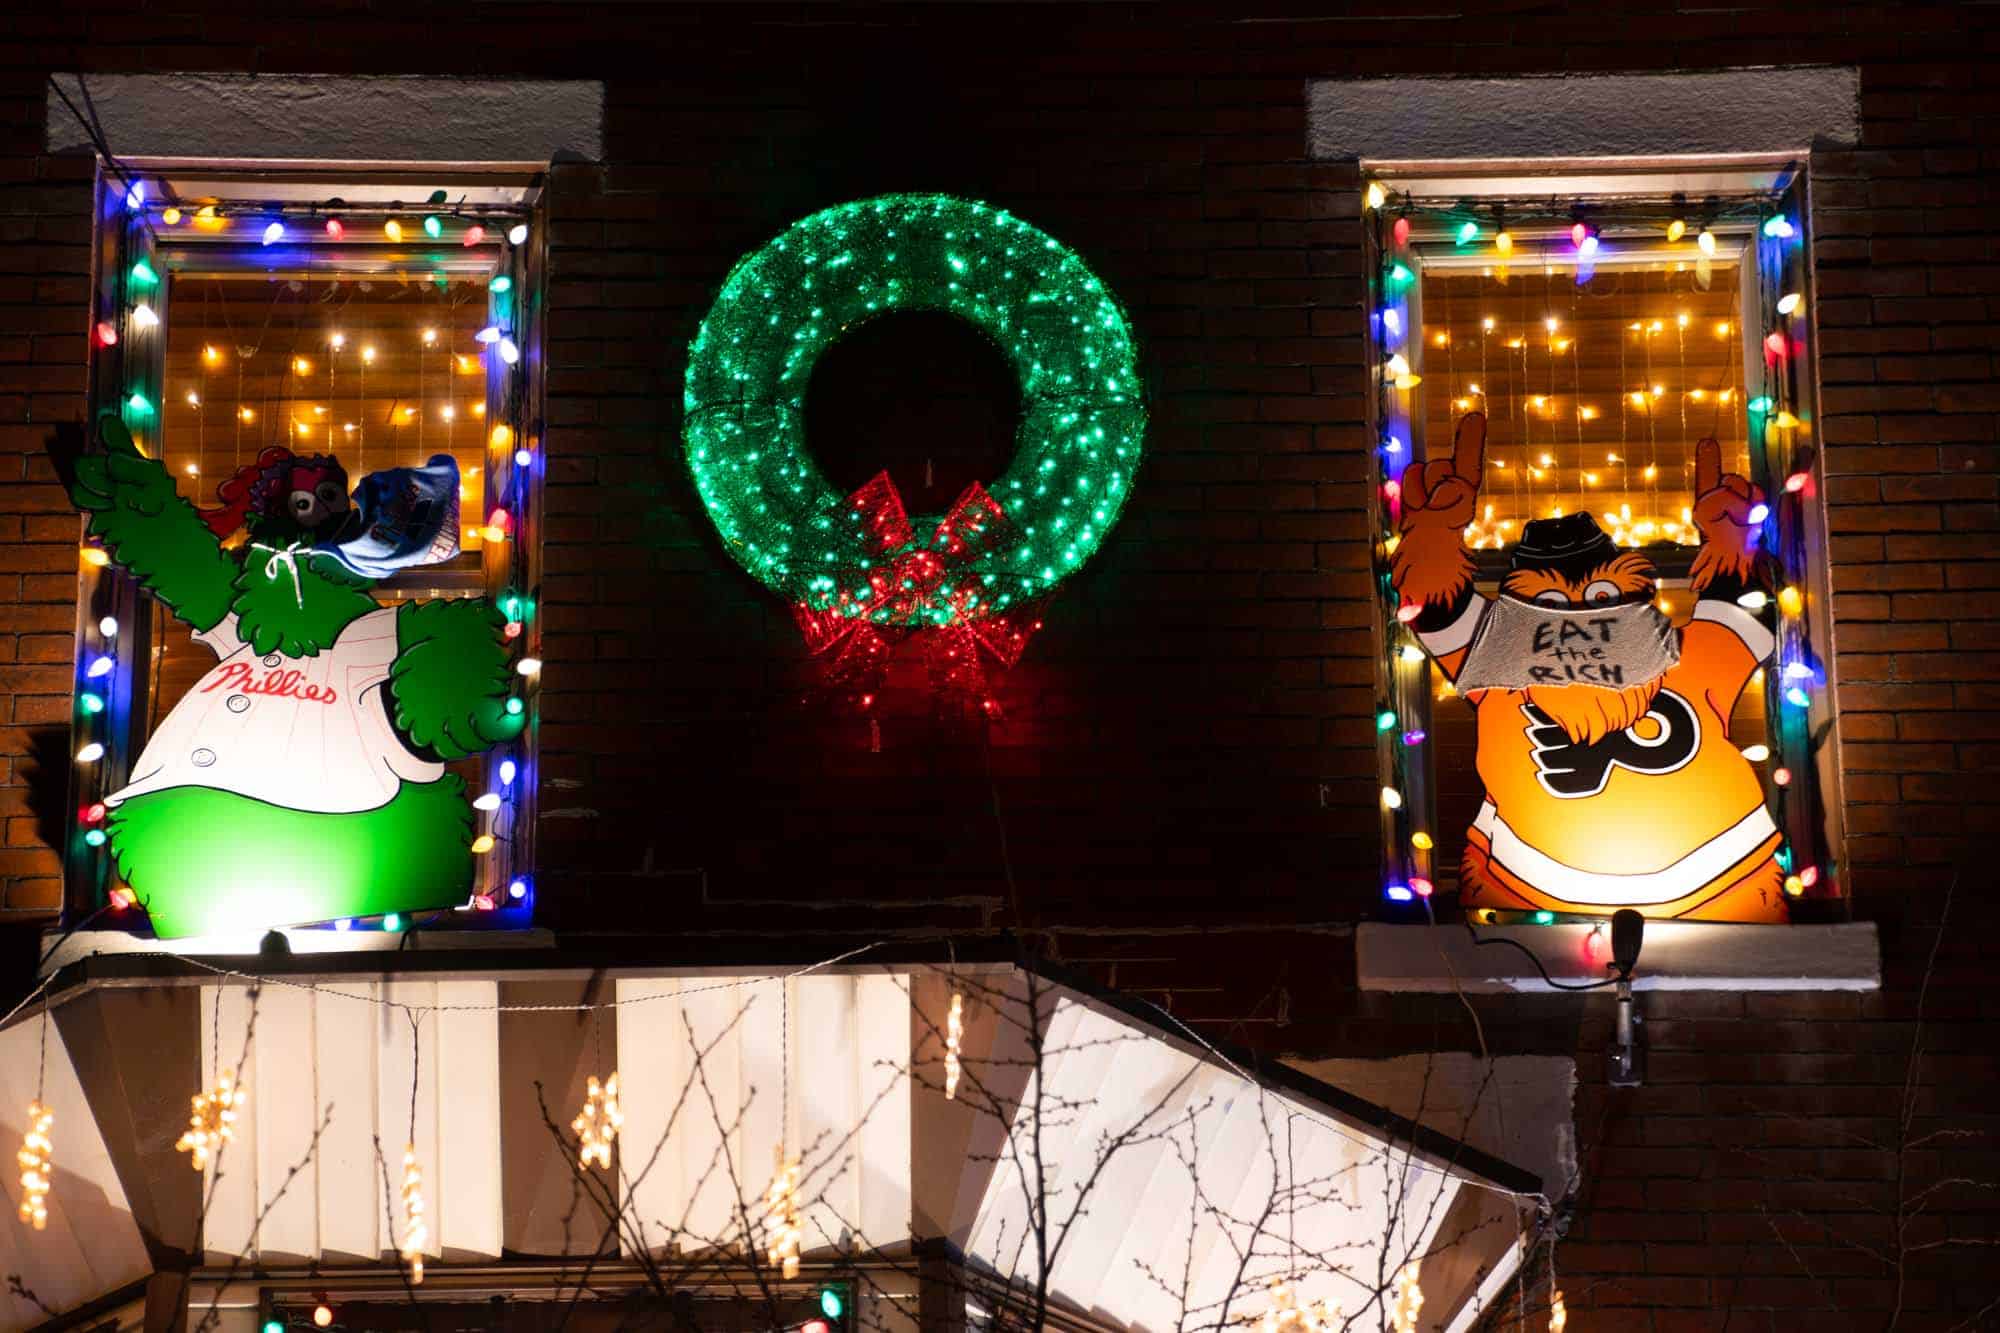 Christmas wreath with Gritty and the Philly Phanatic in the windows.